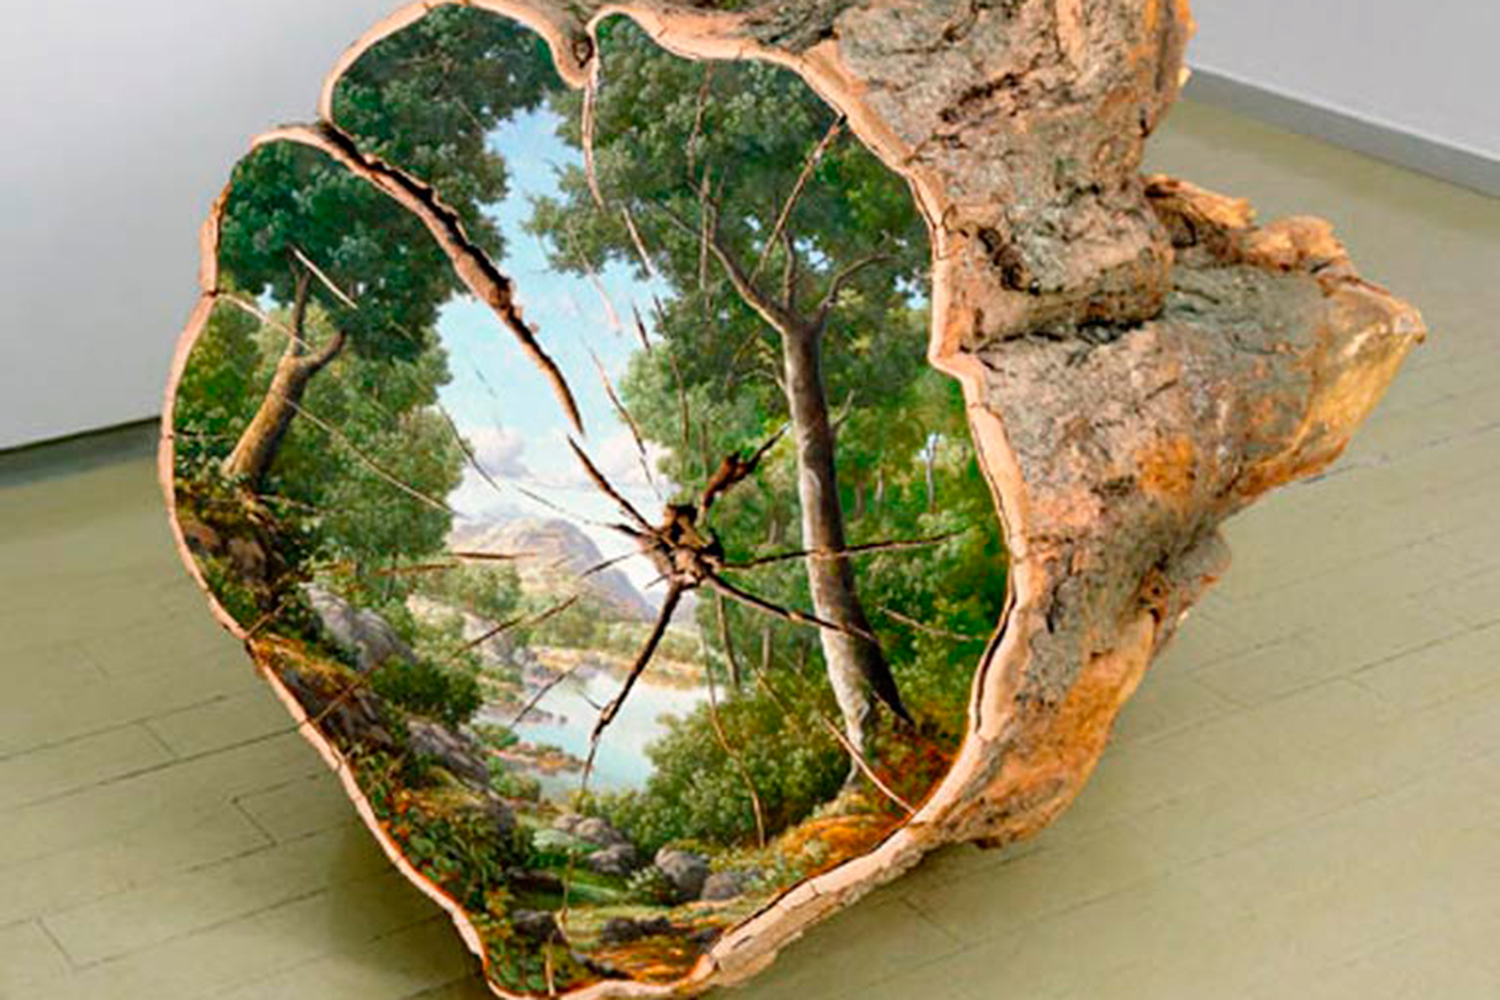 Artist paints the natural origins of trees on fallen logs.